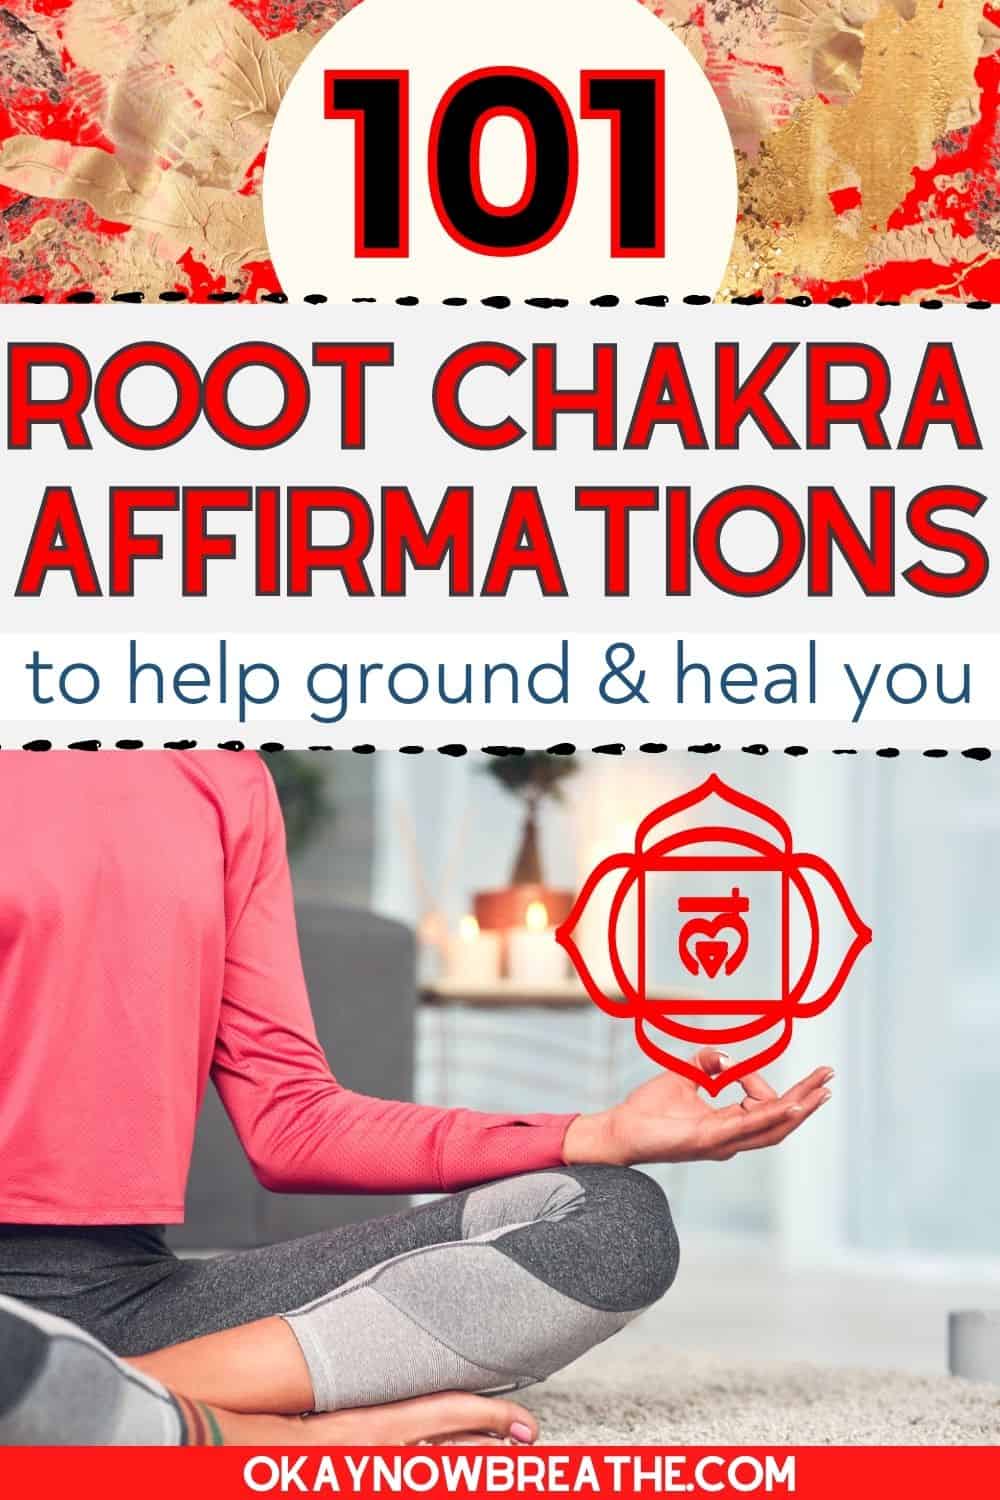 Sitting in a crossed legs position on the floor, a woman is using a meditative mudra with an image of the root chakra above her hand. At the top of the image, text says "101 Root Chakra Affirmations to help ground and heal you - okaynowbreathe.com"